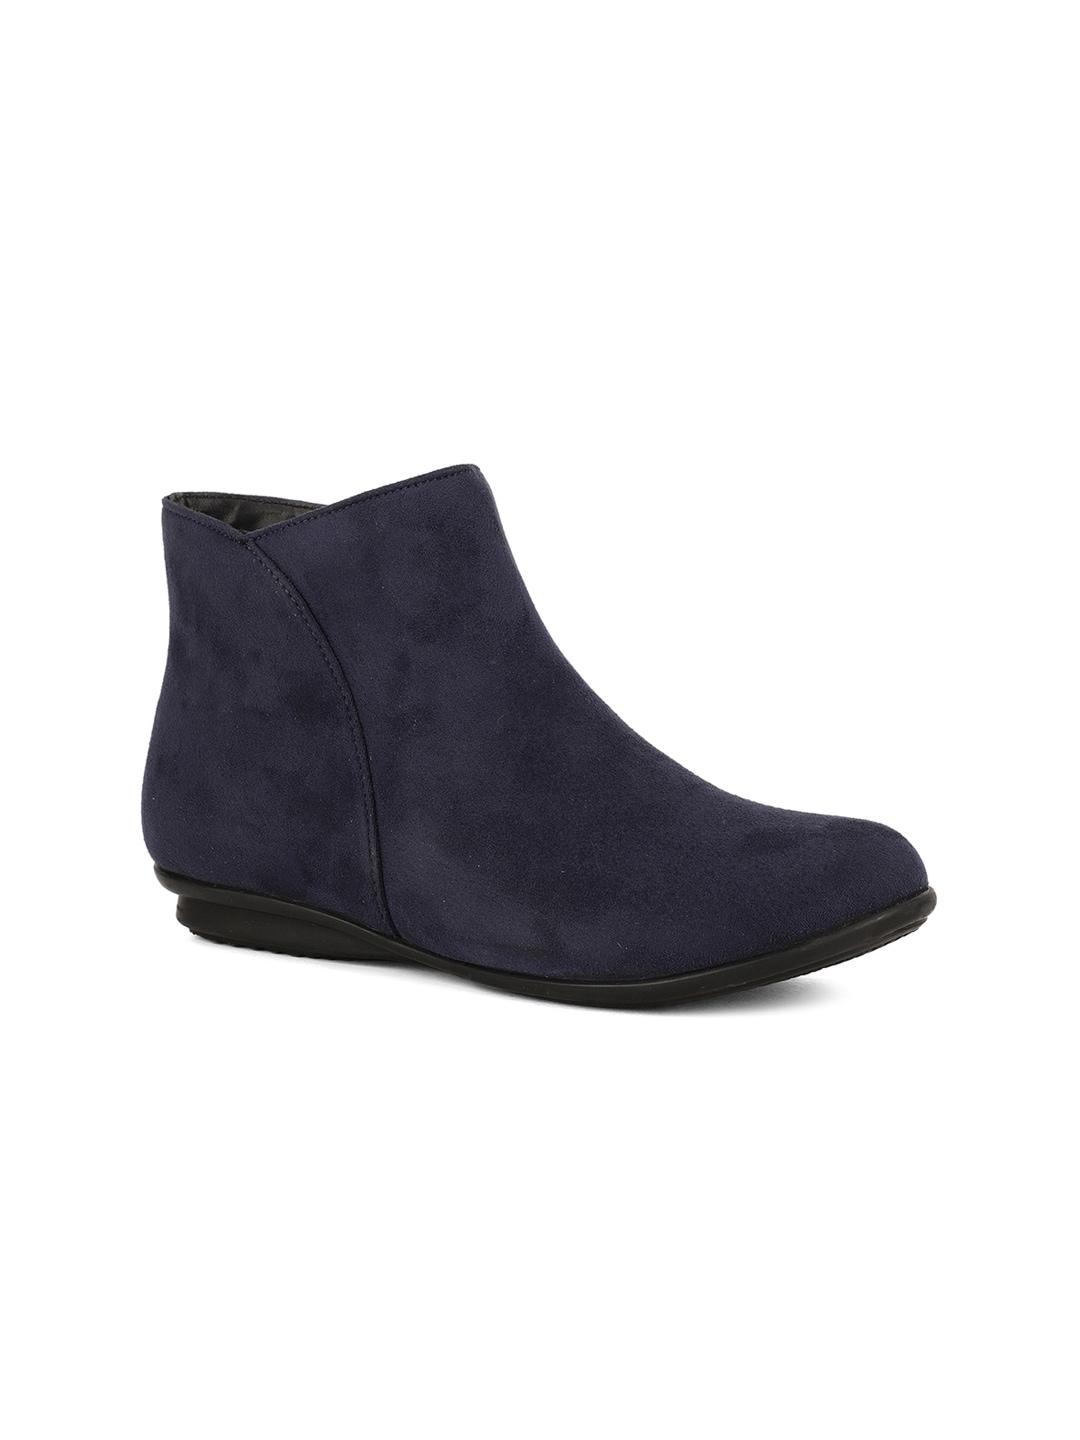 bruno-manetti-women-navy-blue-leather-flat-boots